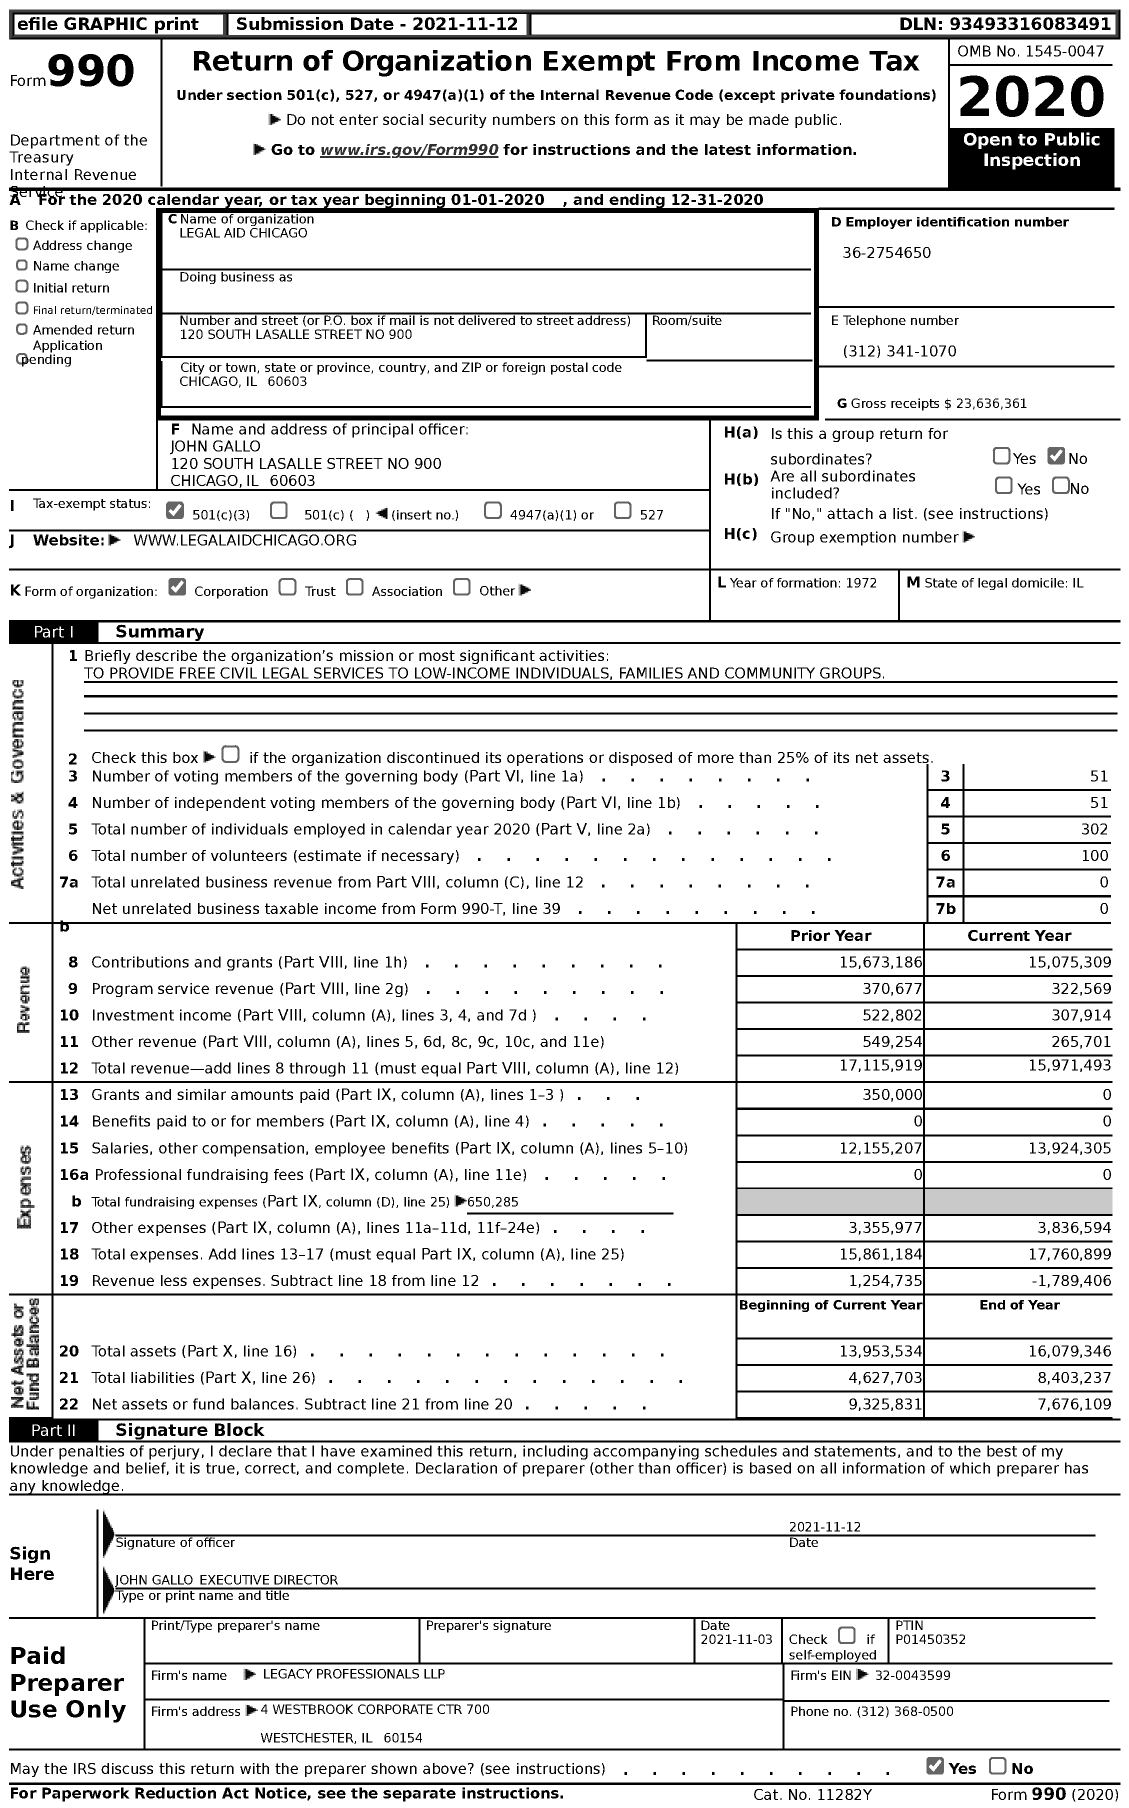 Image of first page of 2020 Form 990 for Legal Aid Chicago (LAF)